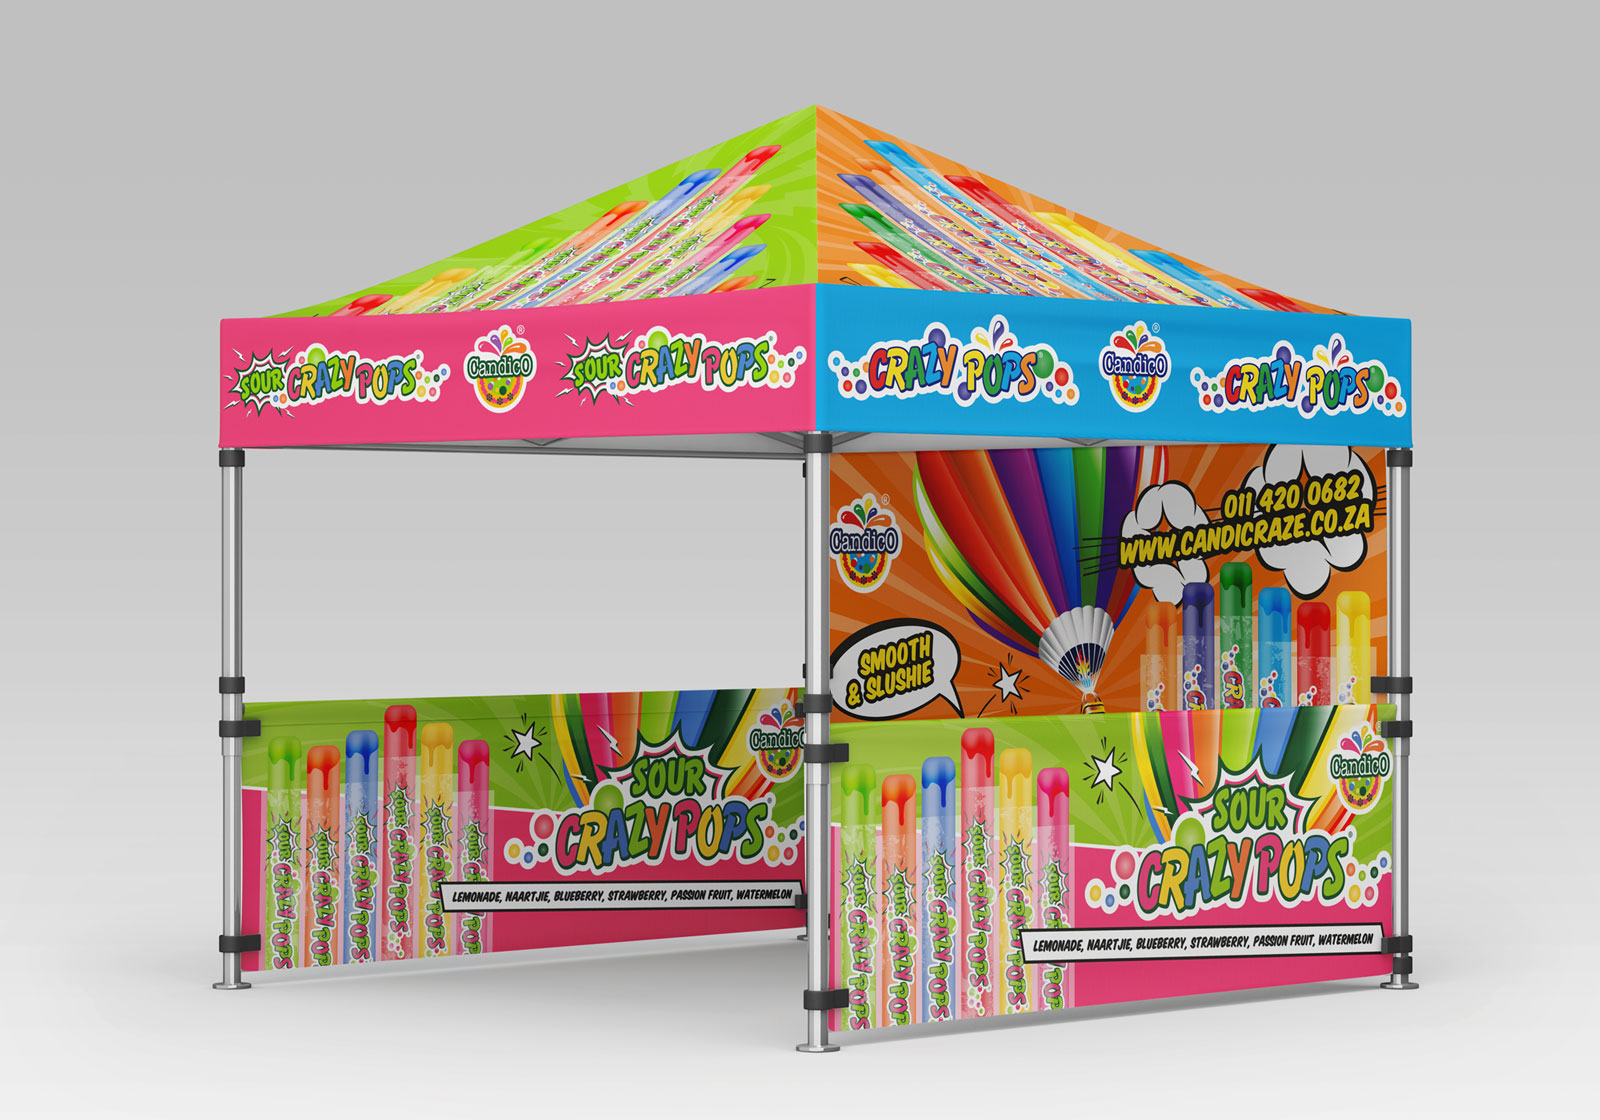 Branded Gazebo and Promotional Display Items Graphic Design